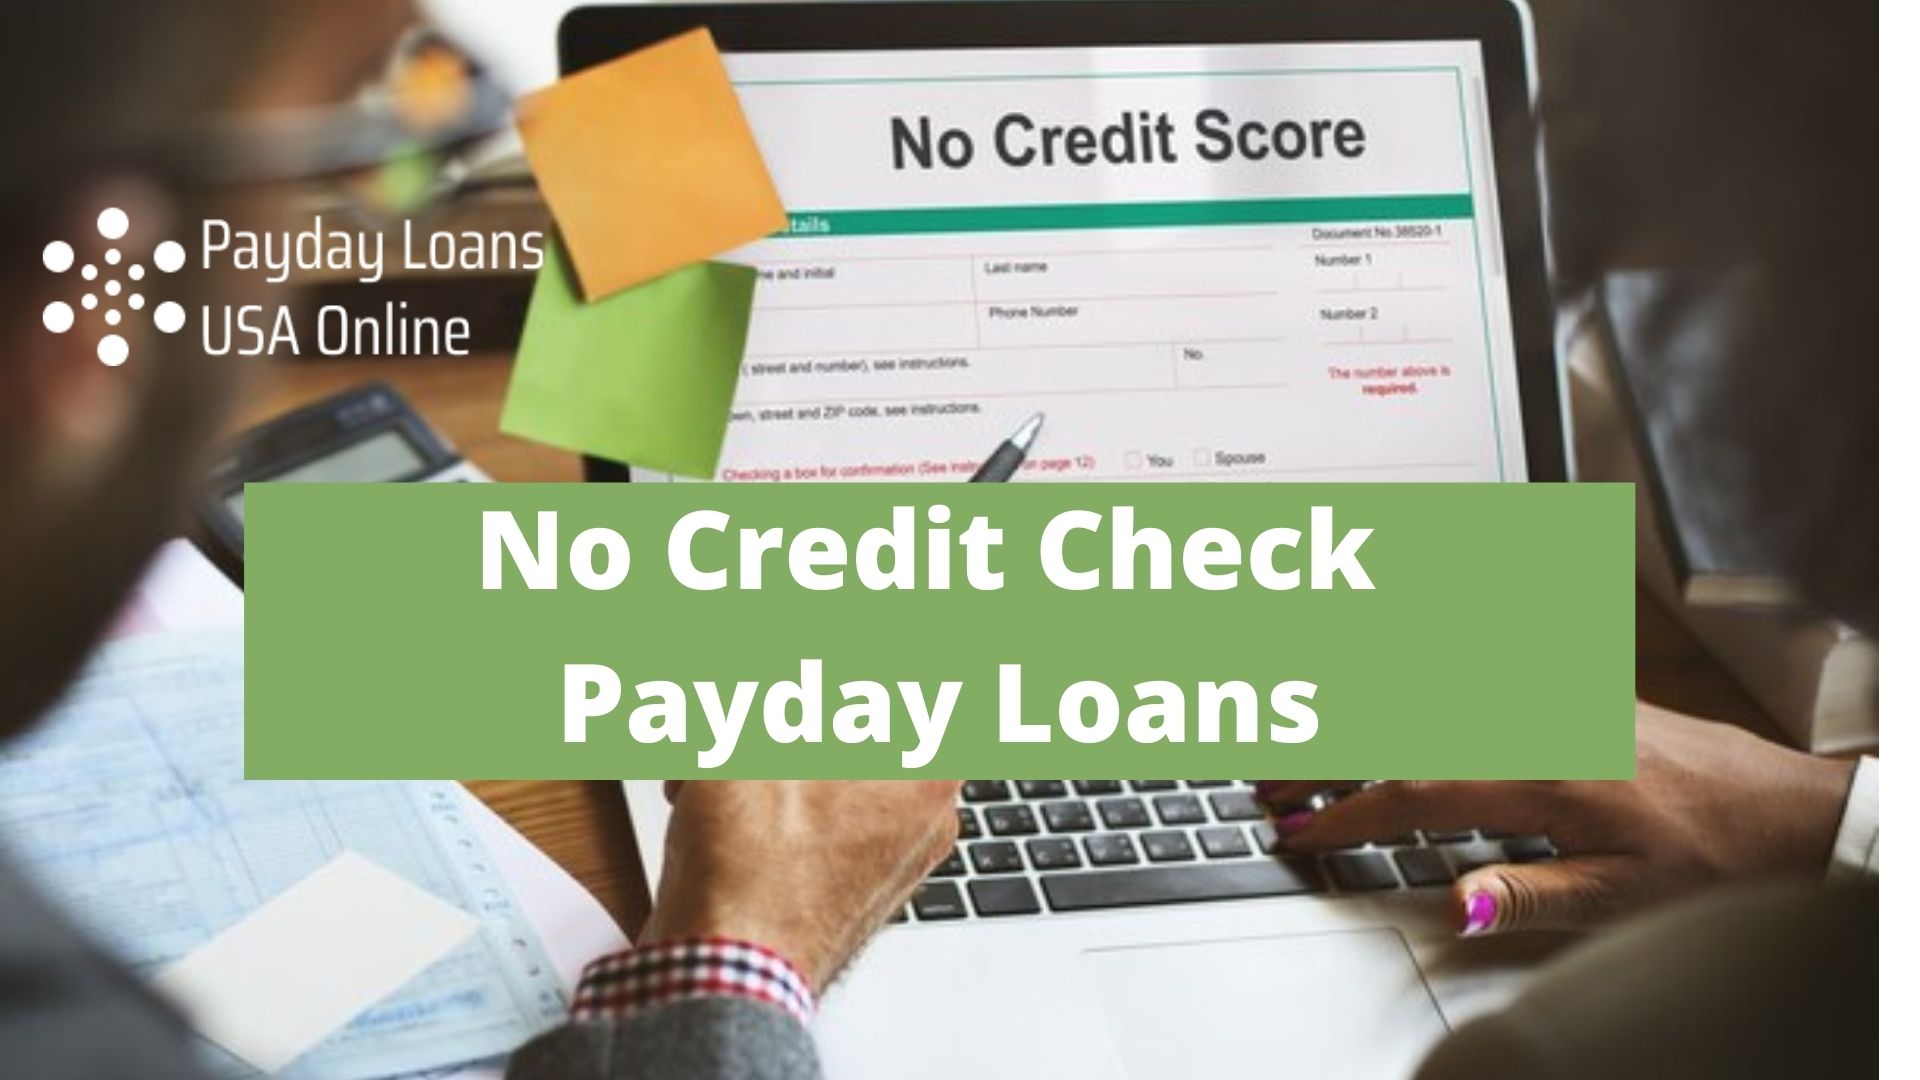 Payday Loans Online with No Credit Check